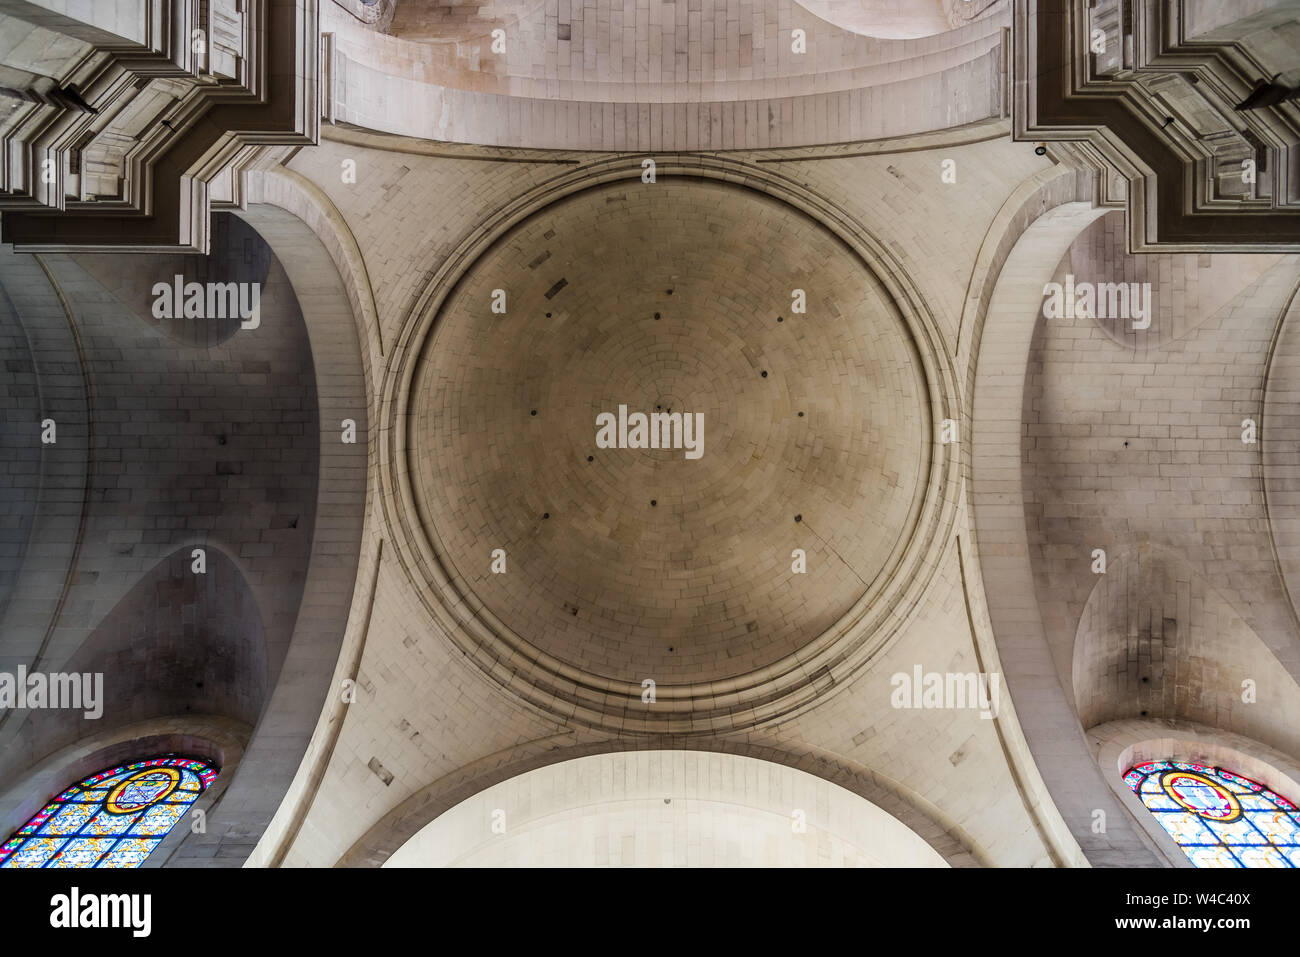 La Rochelle, France - August 6, 2018: La Rochelle Cathedral. Low angle interior view of the dome Stock Photo